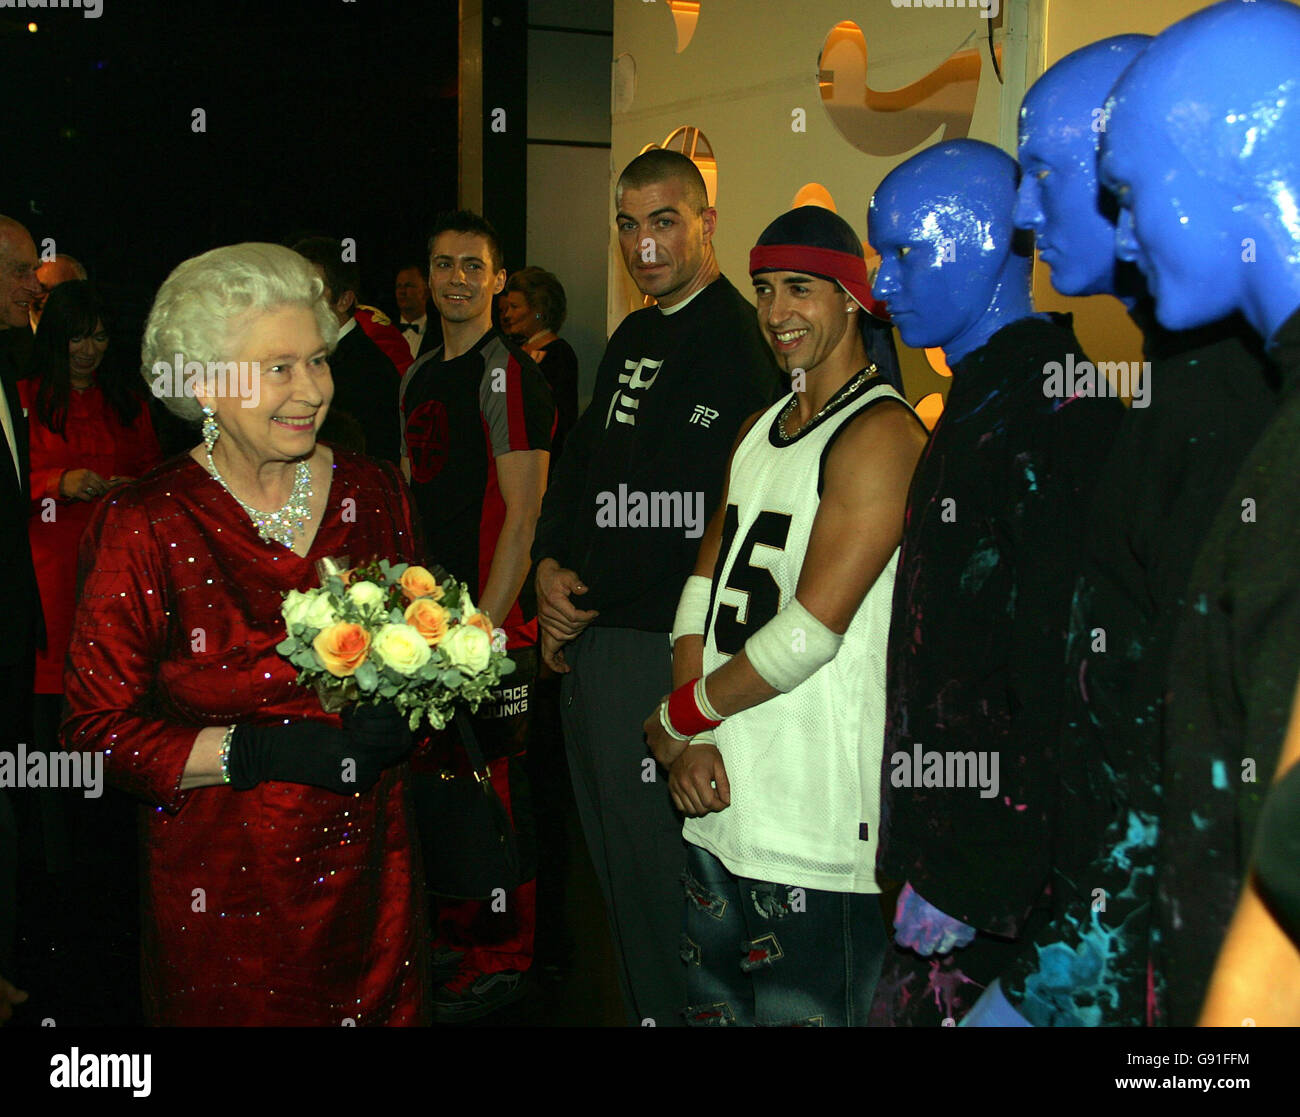 Britain's Queen Elizabeth II meets the Blue Man Group after the Royal Variety Performance, Monday 21 November 2005 at the Wales Millennium Centre in Cardiff. See PA Story SHOWBIZ Variety. PRESS ASSOCIATION Photo. Photo credit should read: Austin Hargrave/Daily Mirror/PA/NPA Pool Stock Photo